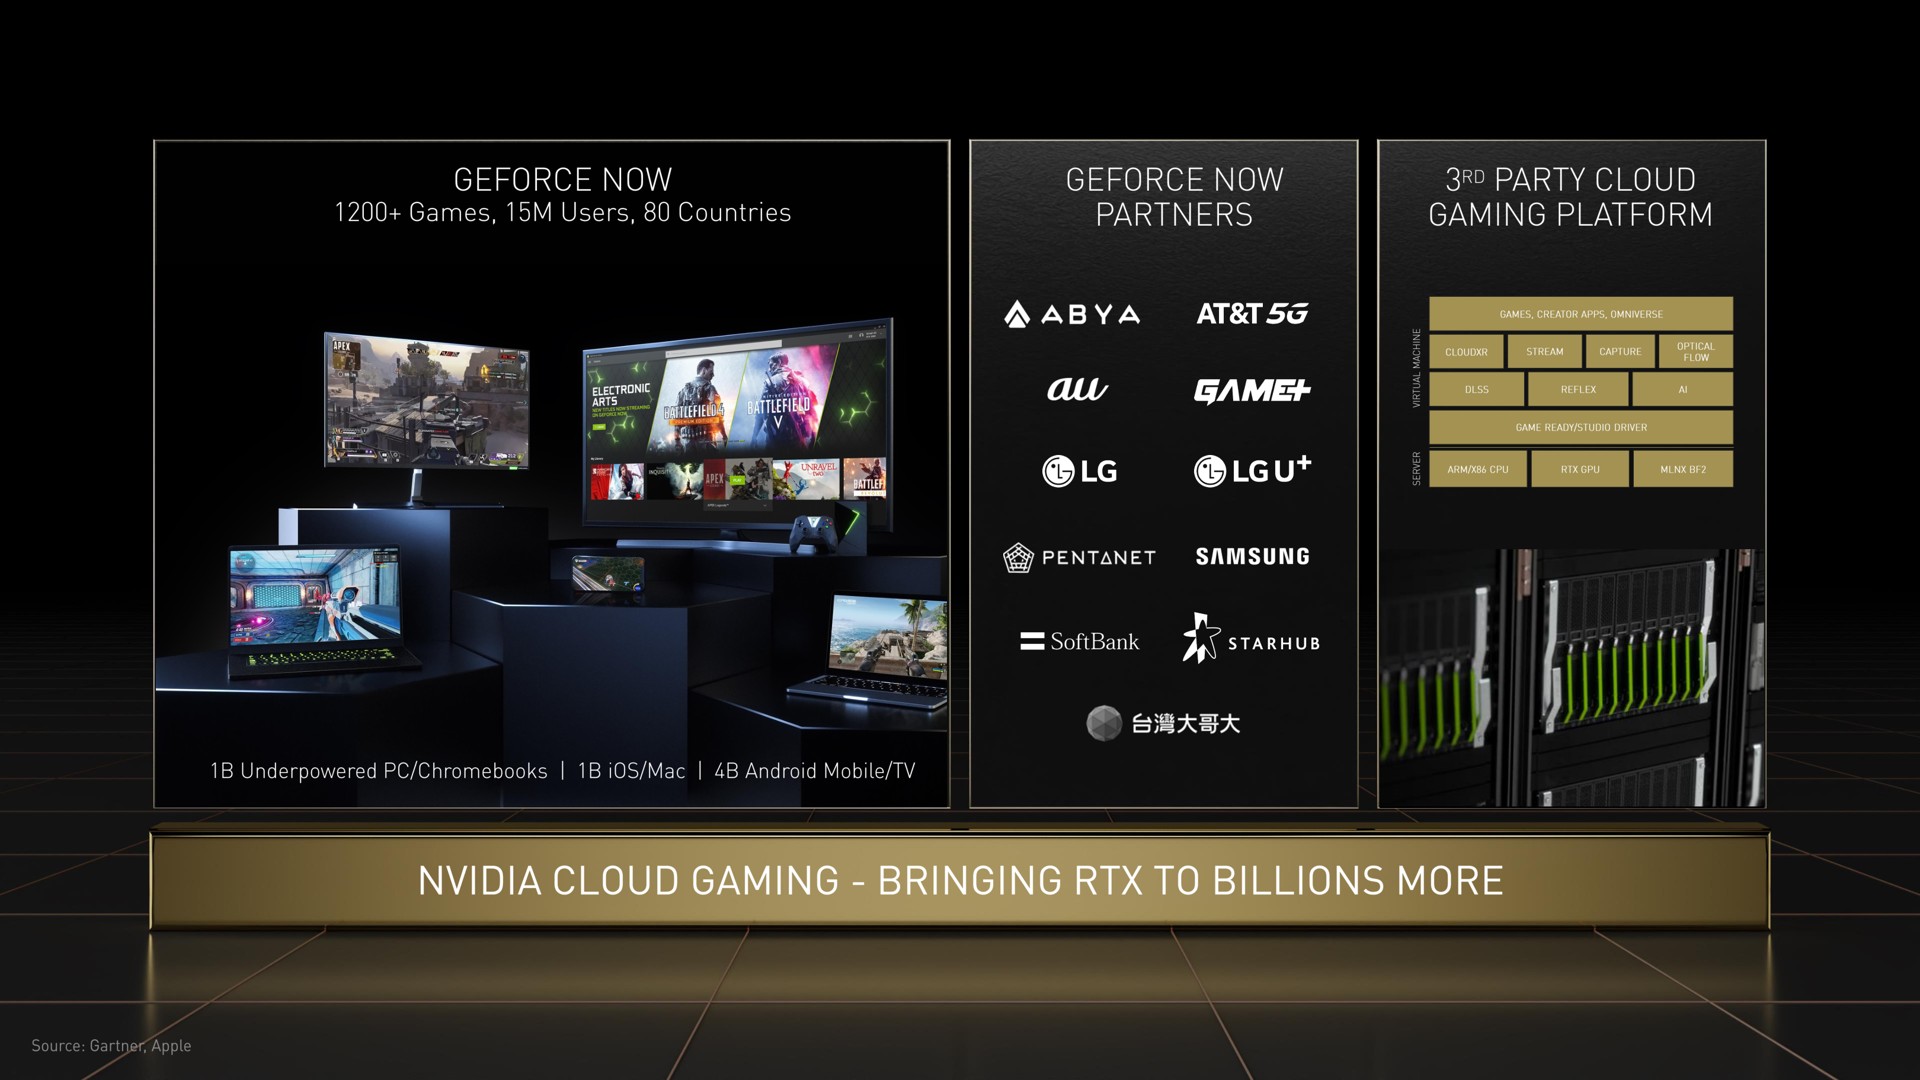 now partners party cloud gaming platform lee an | NVIDIA